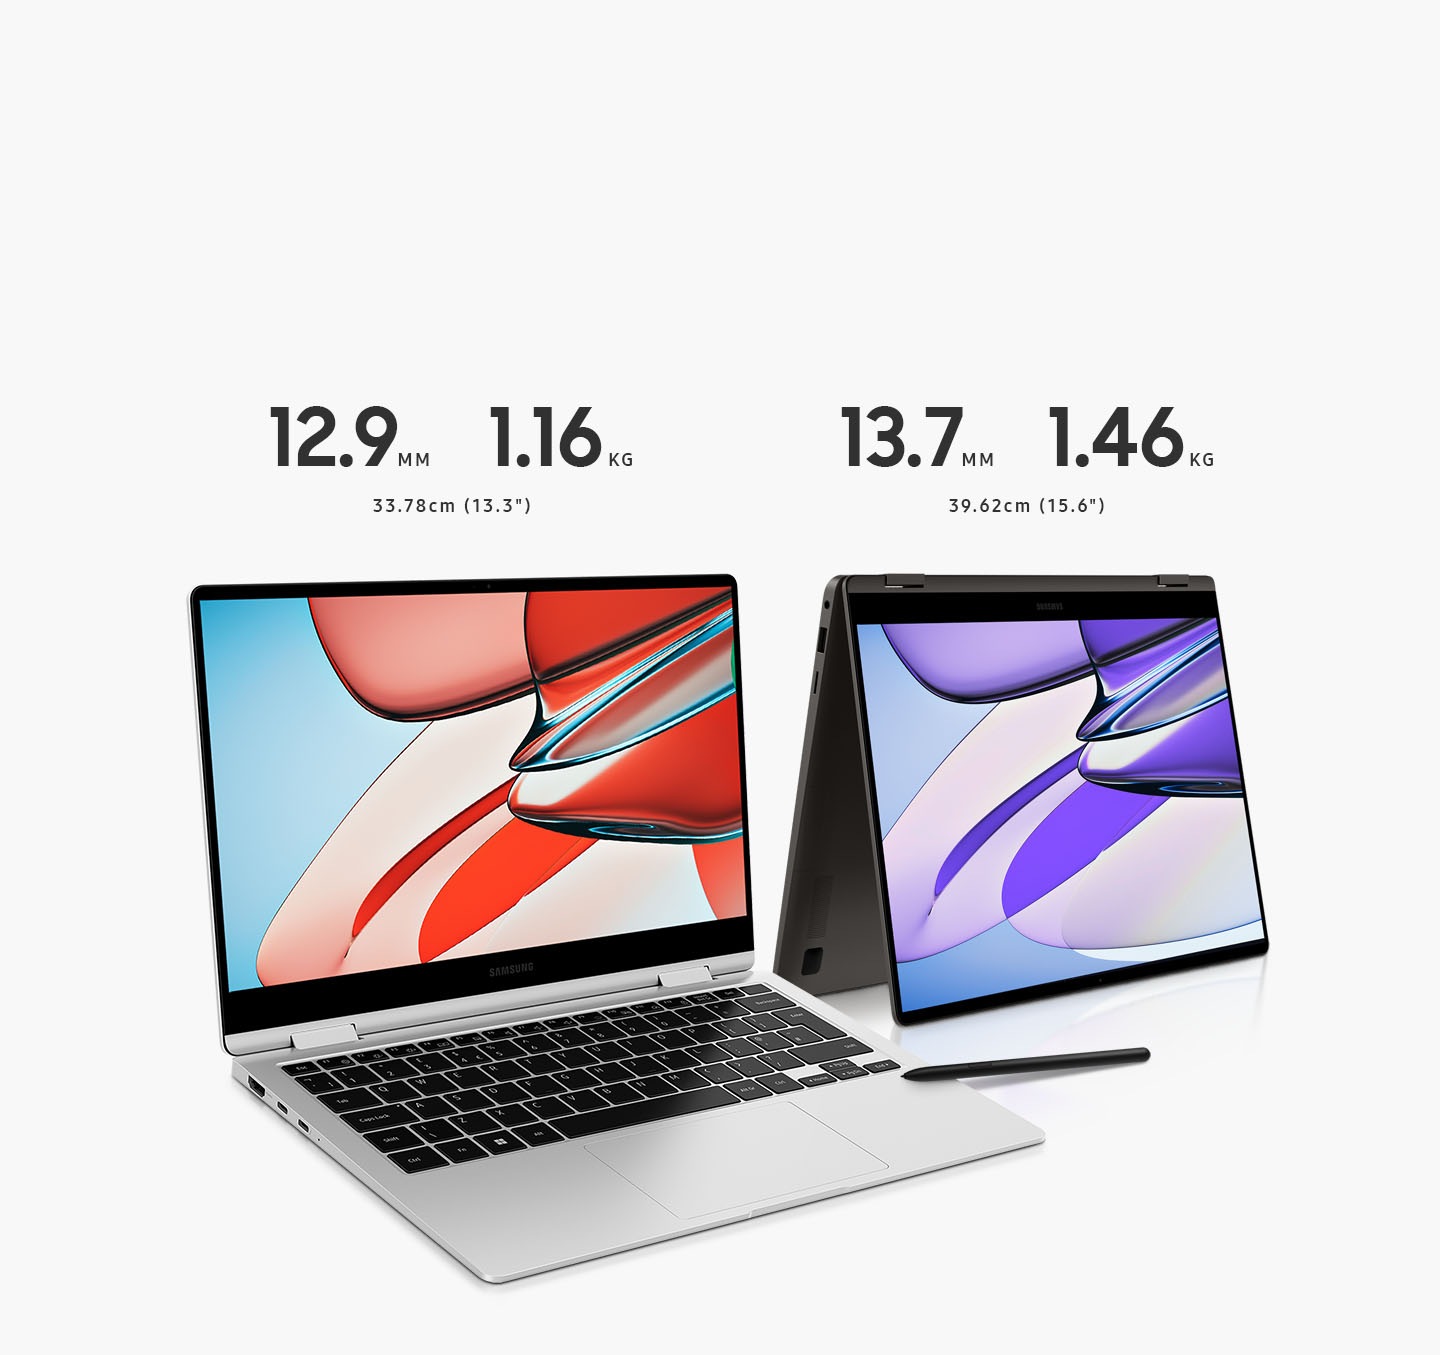 Two Galaxy Book3 360 devices are placed next to each other, opened towards the right side. The one on the left is a silver-colored Galaxy Book3 360 13 inch, with red and pink wallpaper onscreen. 12.9MM, 1.16KG, 13.3". The one on the right side is a graphite-colored Galaxy Book3 360 15 inch, set in tent mode. 13.7MM, 1.46KG, 15.6". An S Pen placed on the floor.